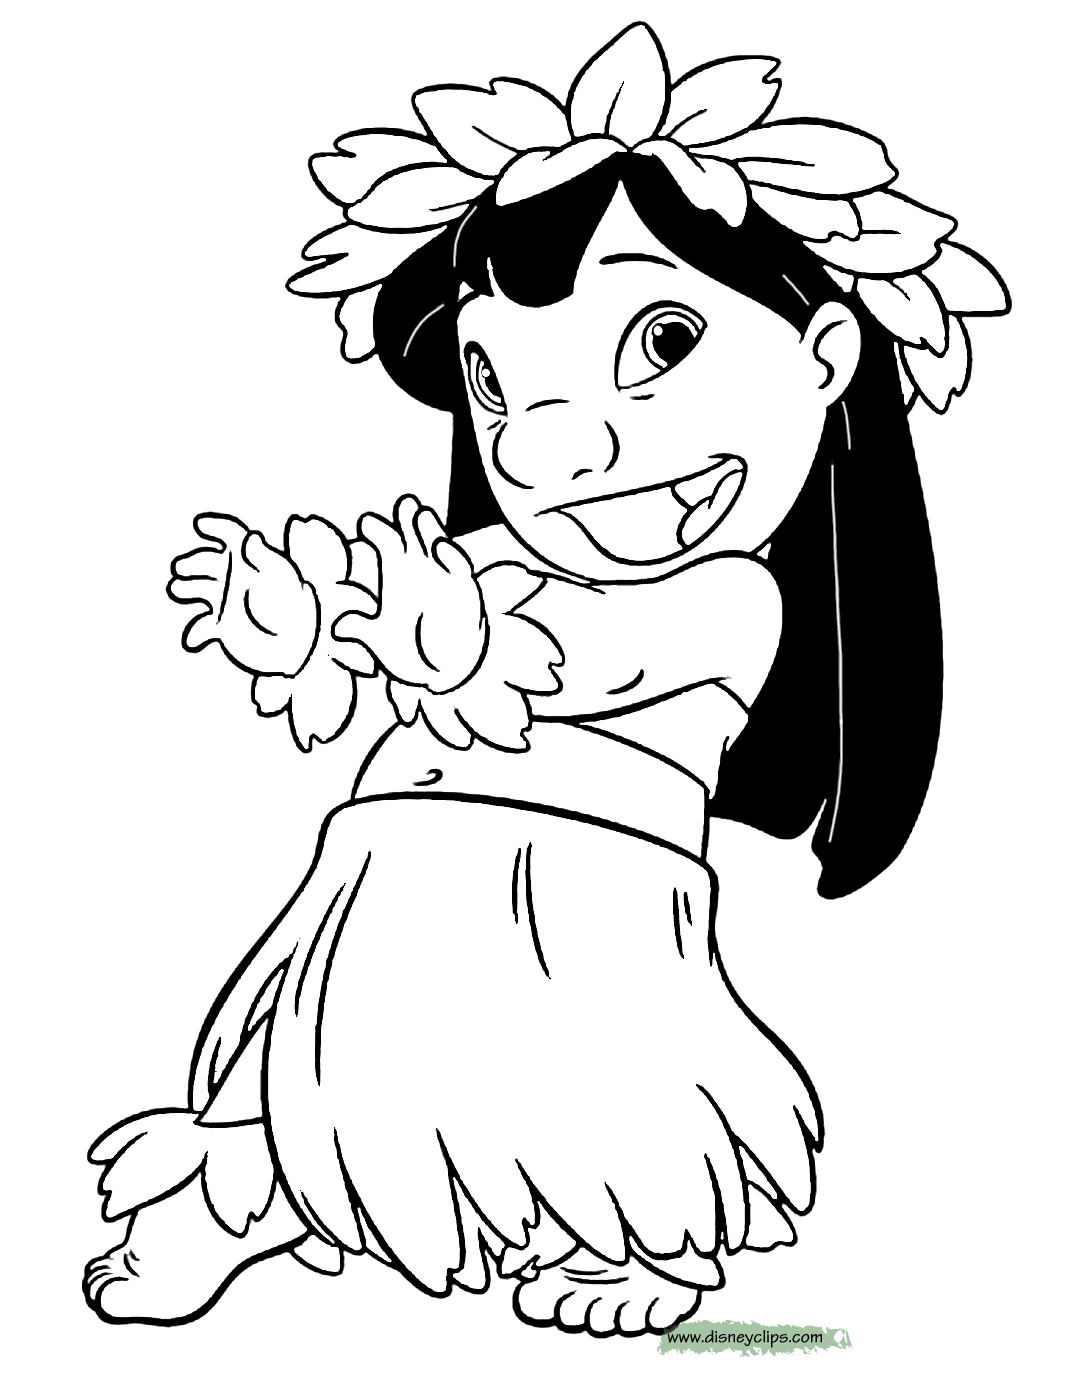 Download Lilo and Stitch Printable Coloring Pages 2 | Disney Coloring Book